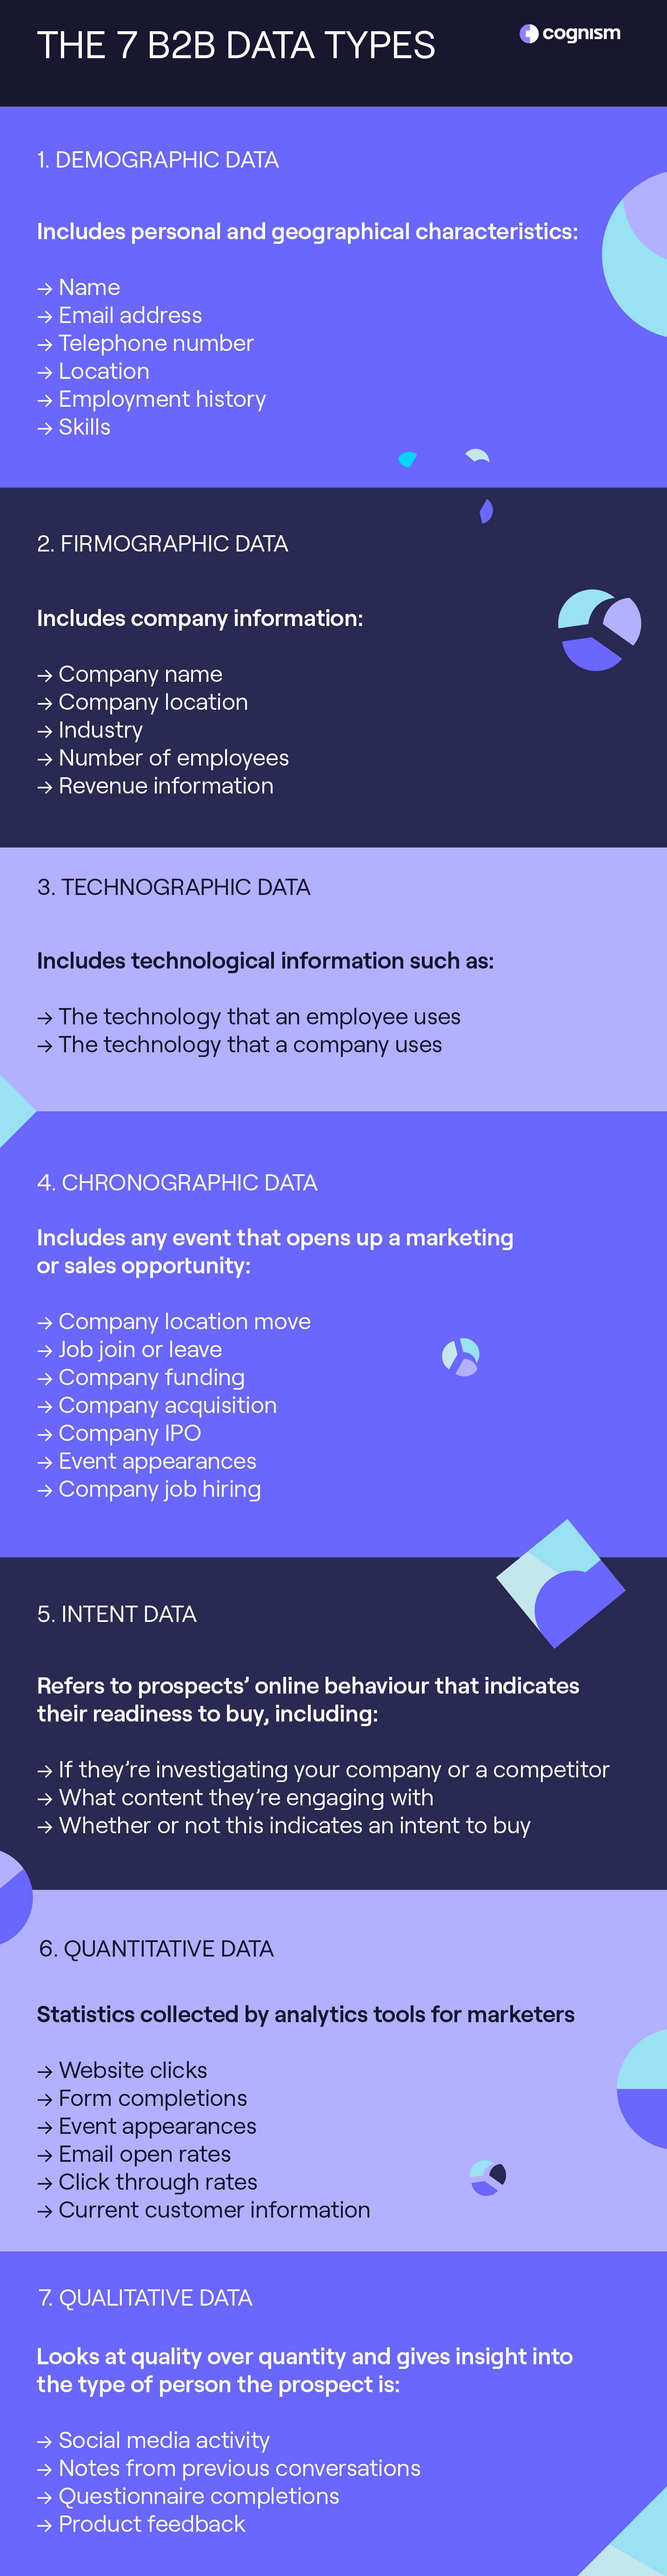 The seven types of B2B data: Demographic, firmographic, technographic, chronographic, intent, quantitative and qualitative.